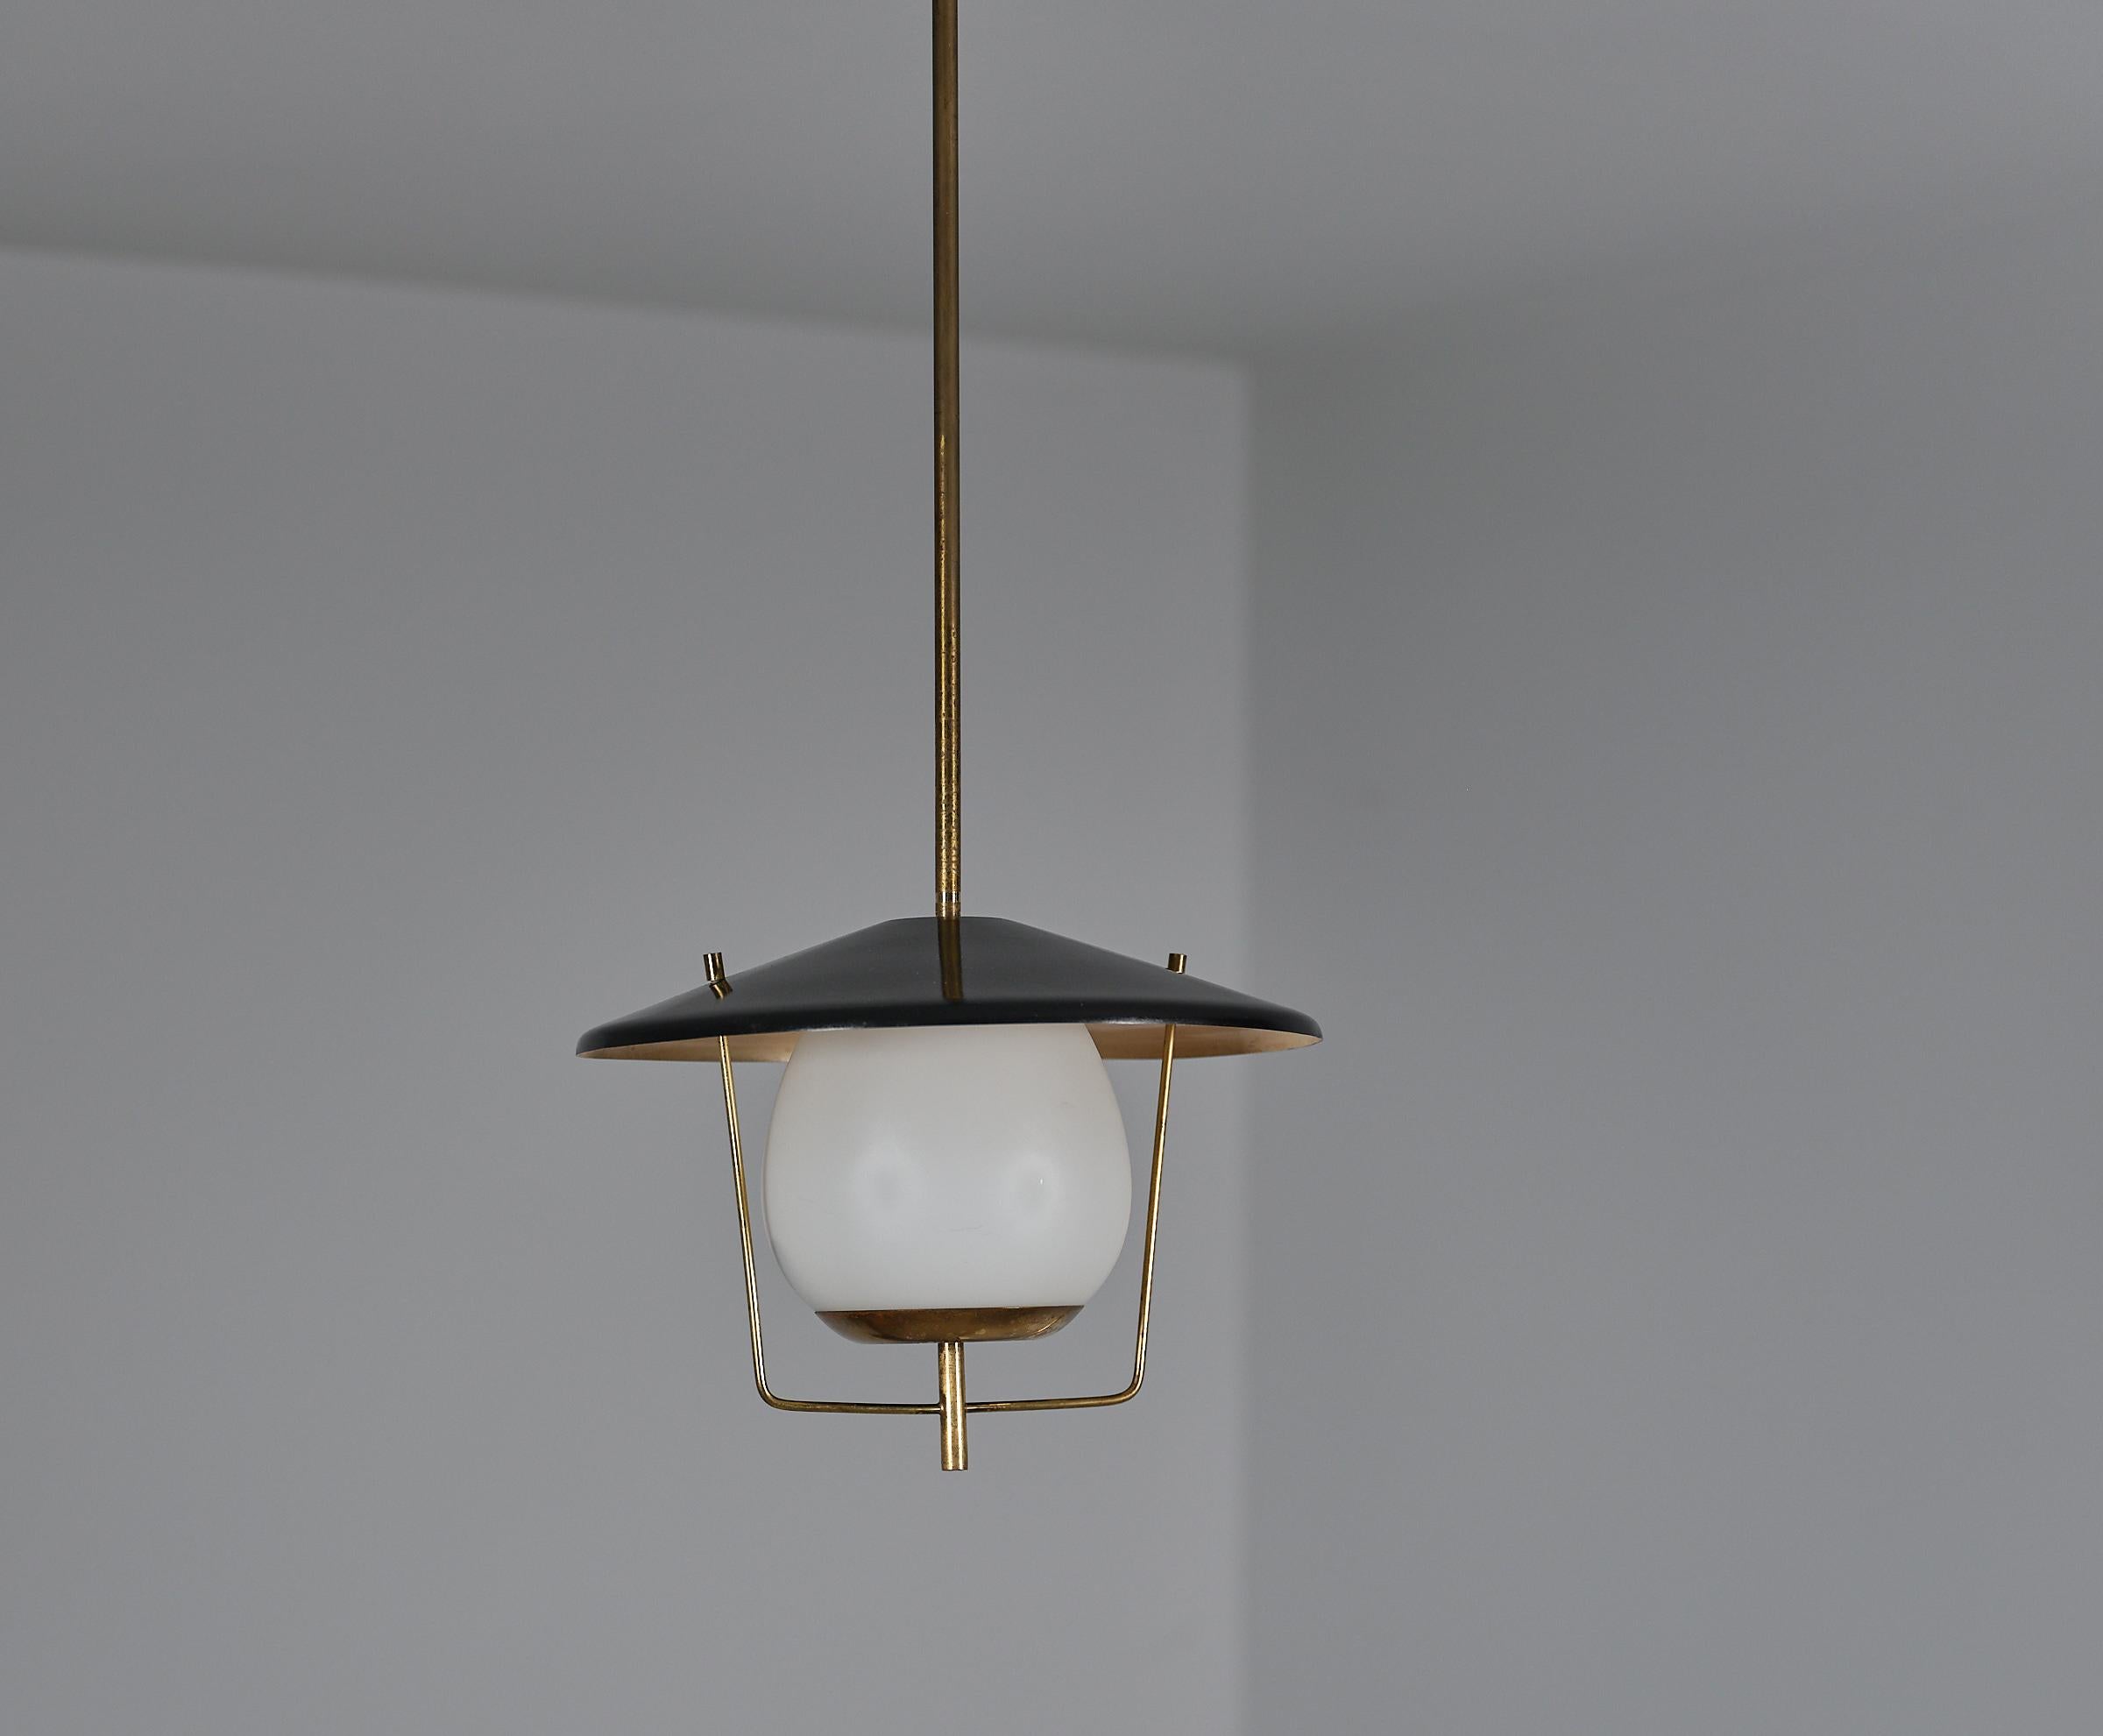 1950s Italian Pendant Lamp - STILNOVO, Brass with Black Shade and Opal Glass In Good Condition For Sale In Rome, IT